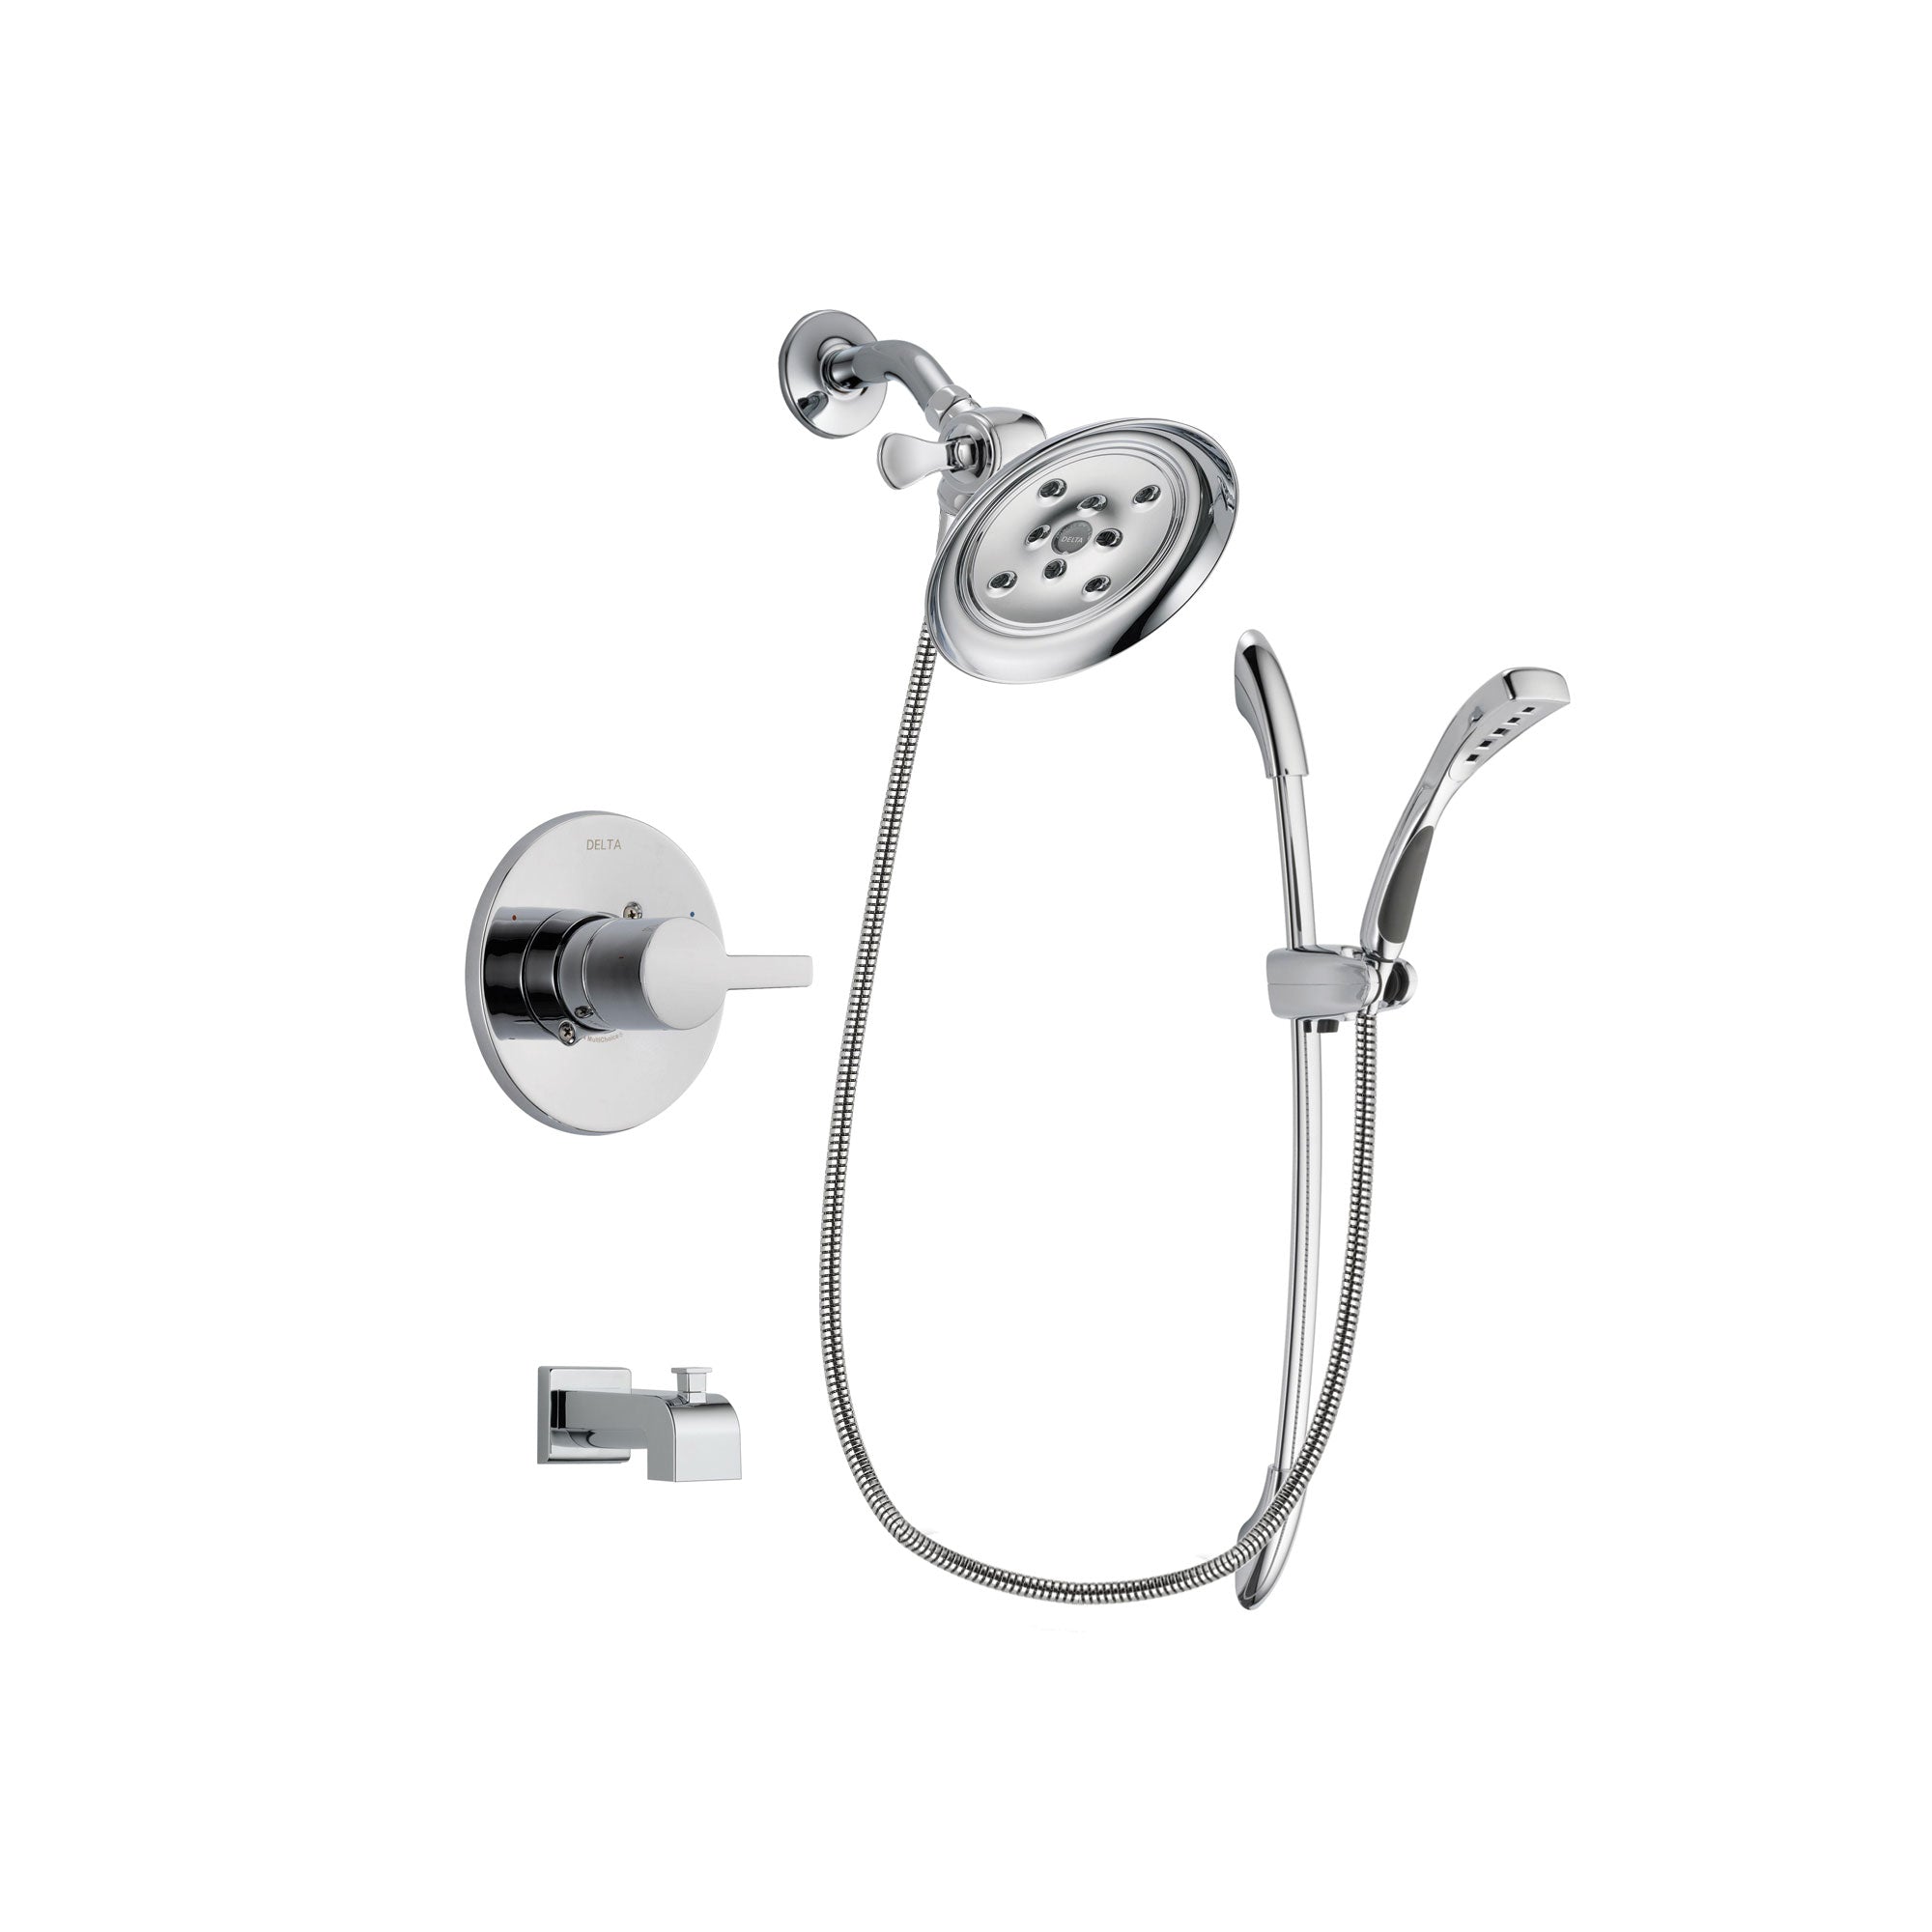 Delta Compel Chrome Finish Tub and Shower Faucet System Package with Large Rain Showerhead and Handheld Shower with Slide Bar Includes Rough-in Valve and Tub Spout DSP0507V